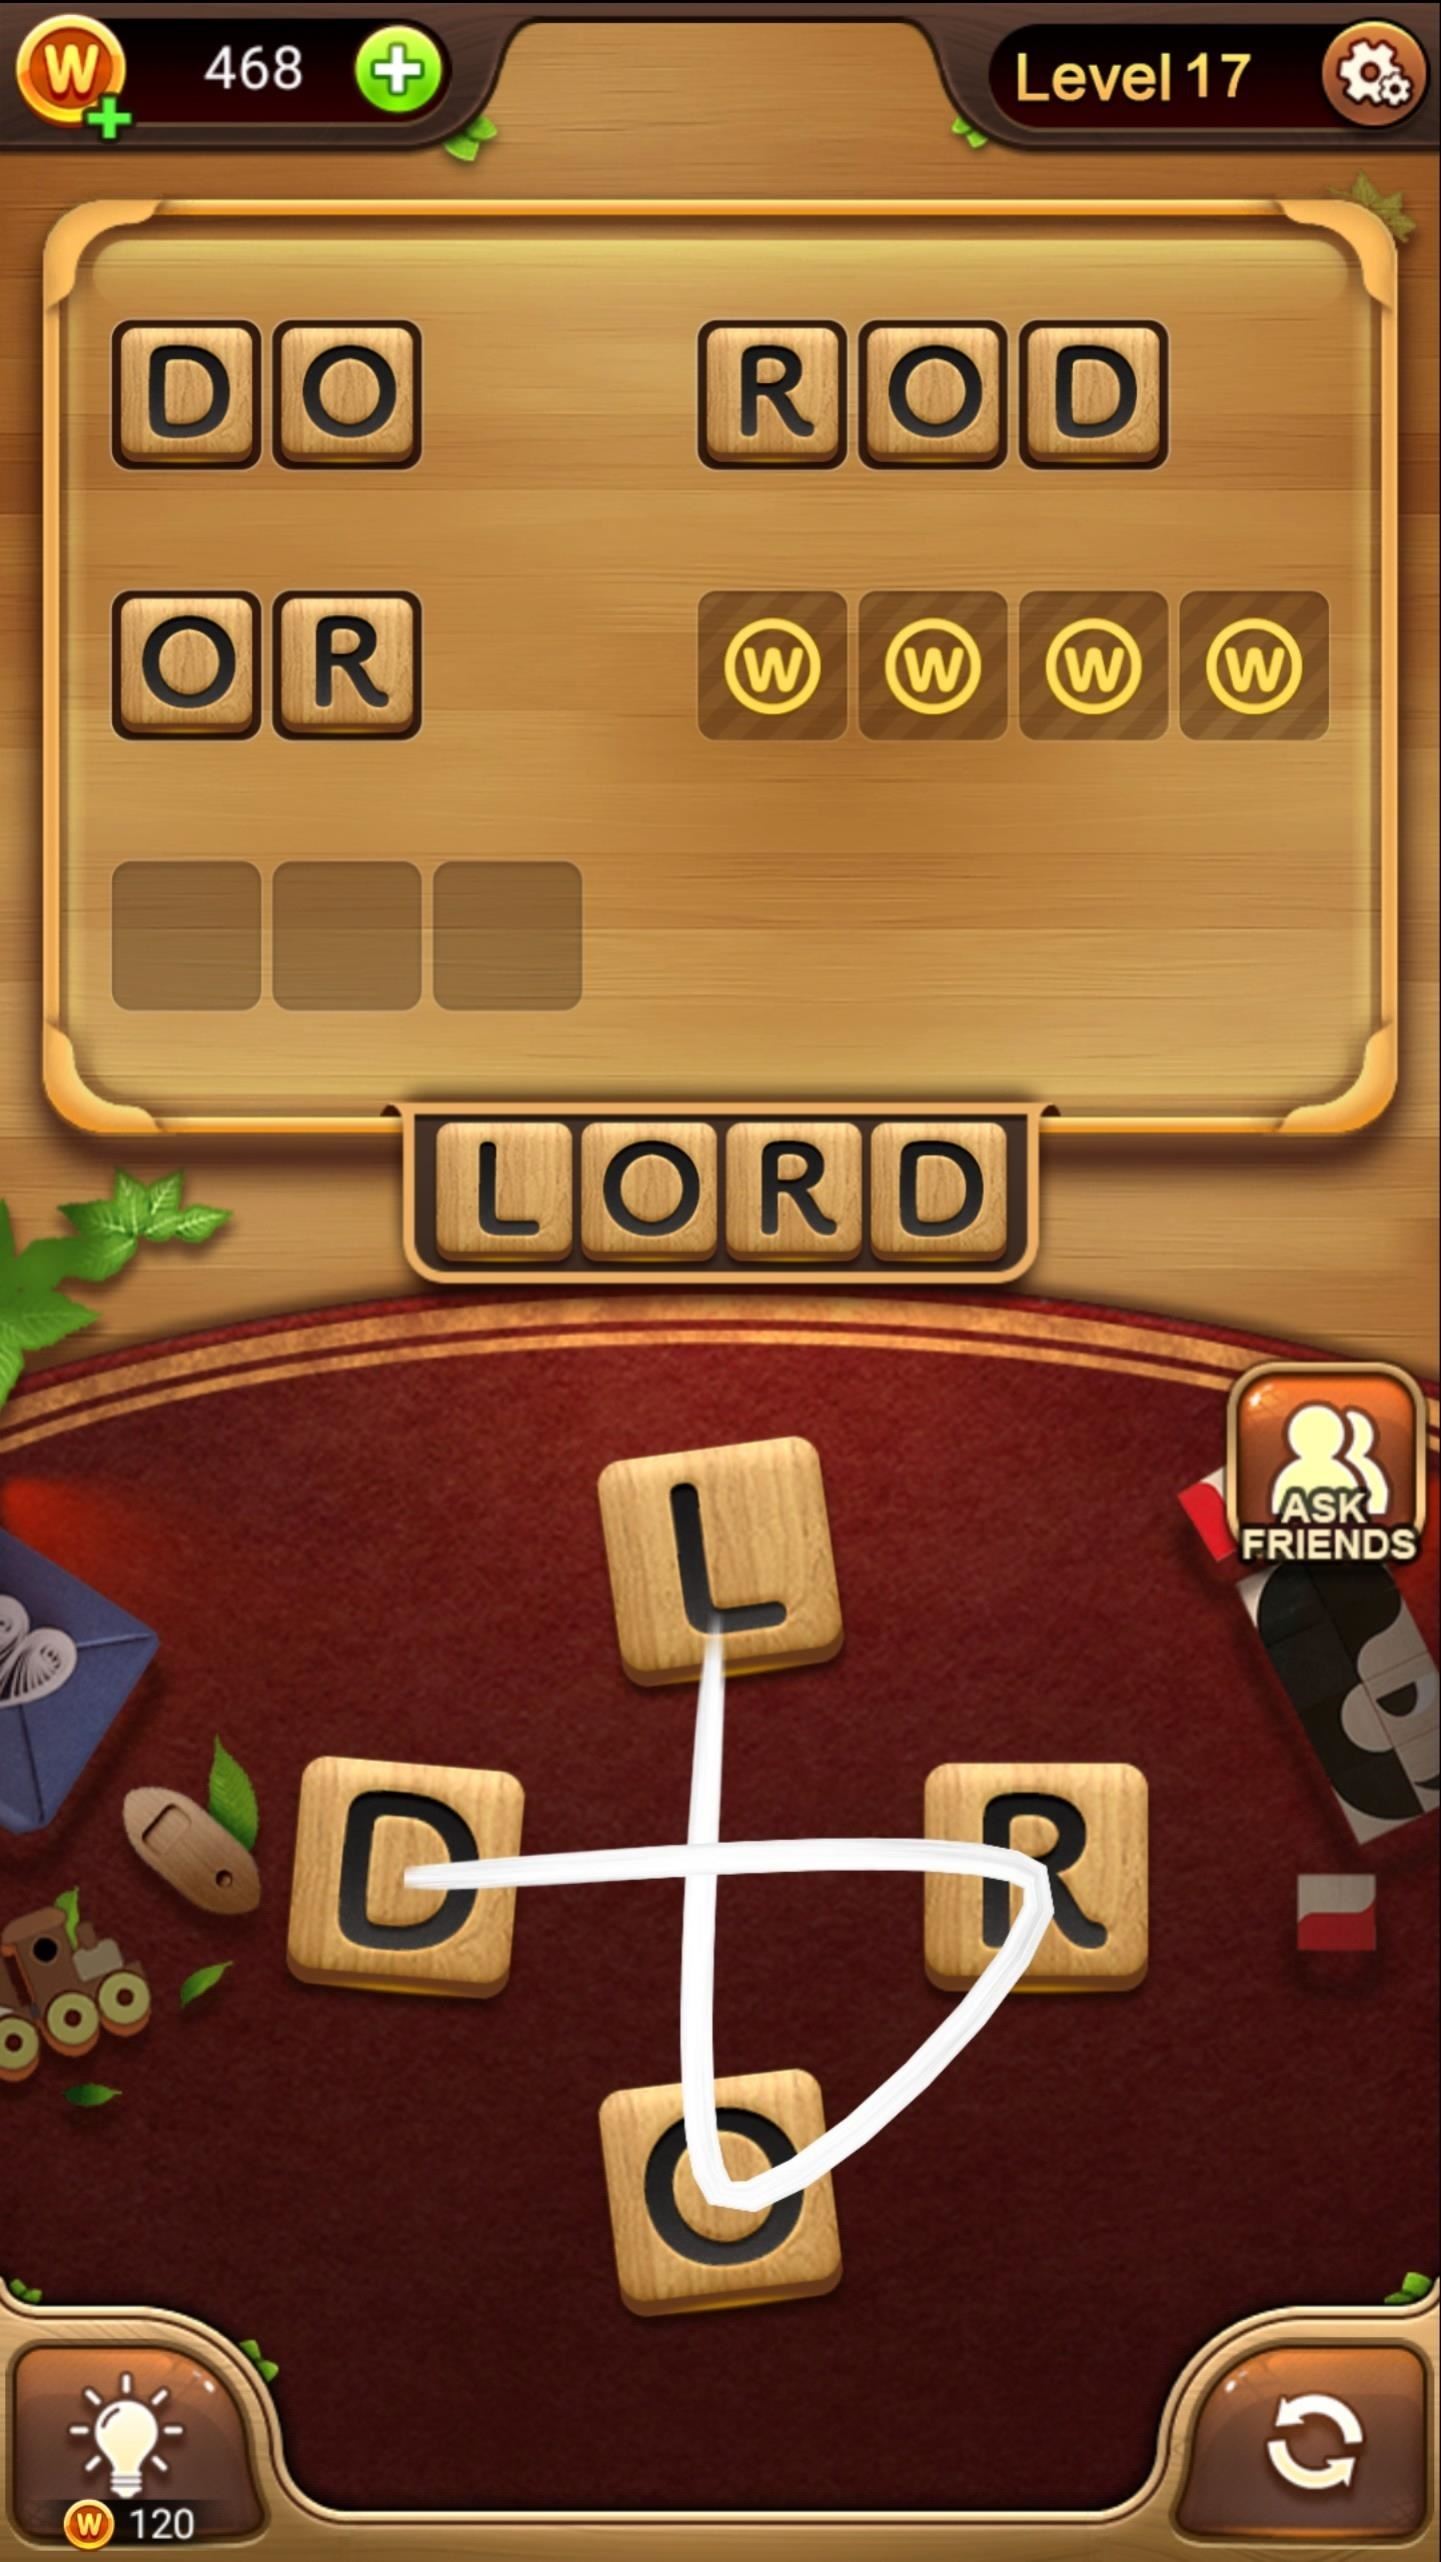 The 10 Best Free Word Games for iPhone & Android - Xegasoft